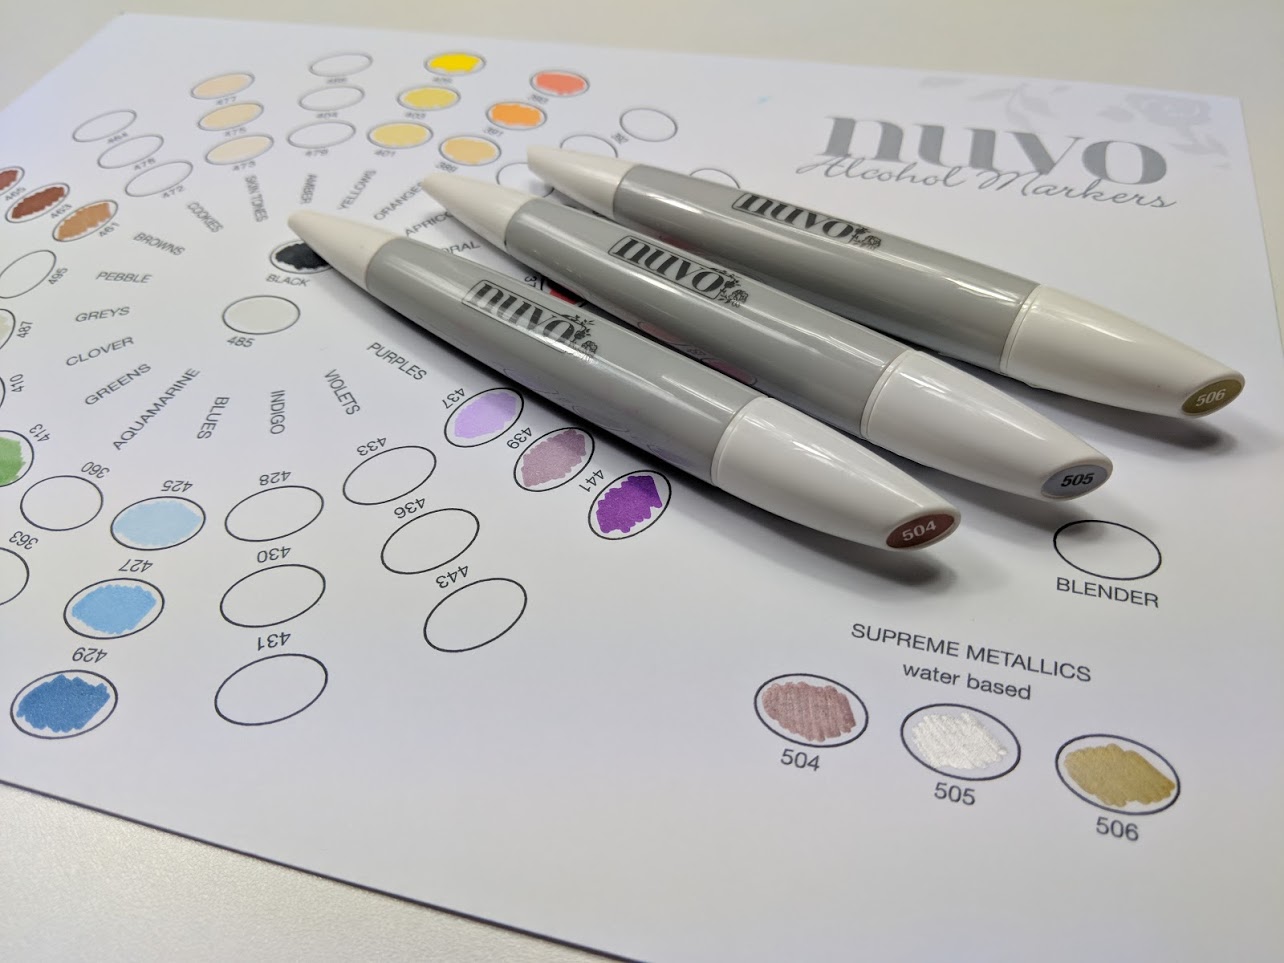 Nuvo Alcohol Markers Color Chart